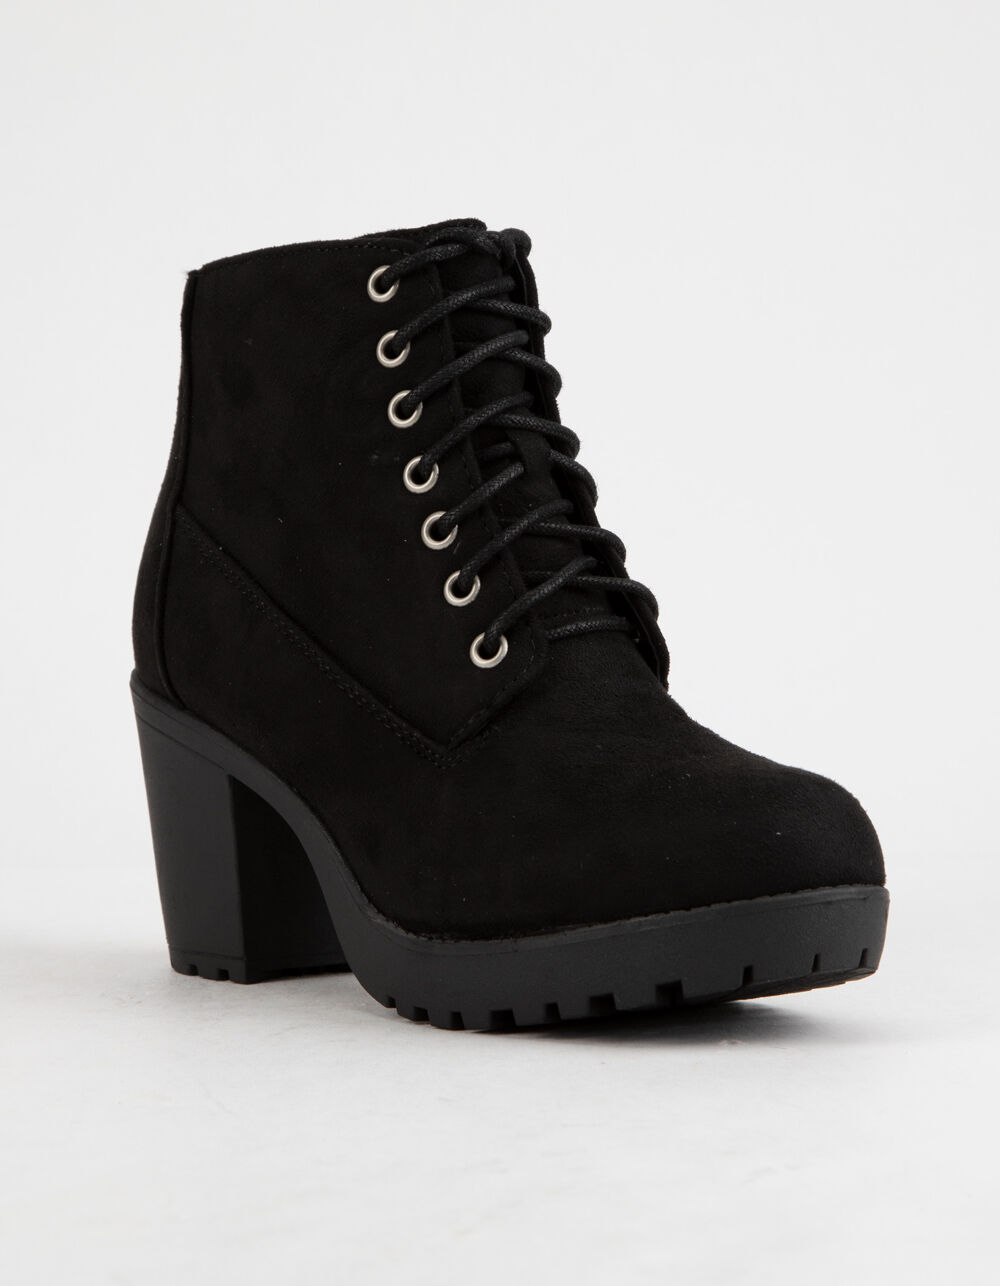 SODA Lug Sole Lace Up Black Womens Booties - BLACK | Tillys